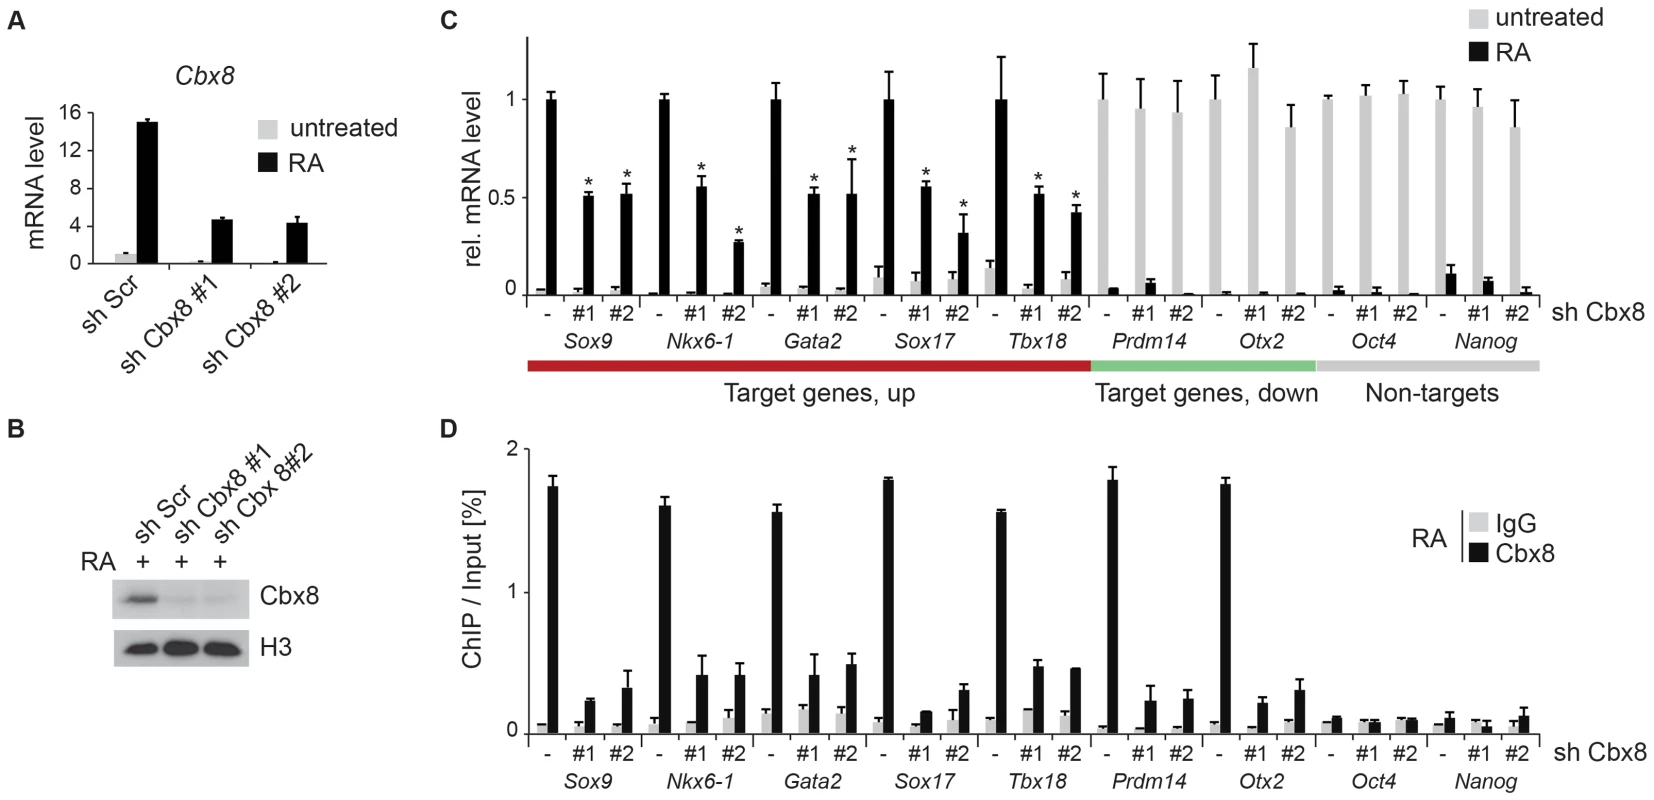 Knockdown of Cbx8 reduces transcription of activated target genes.